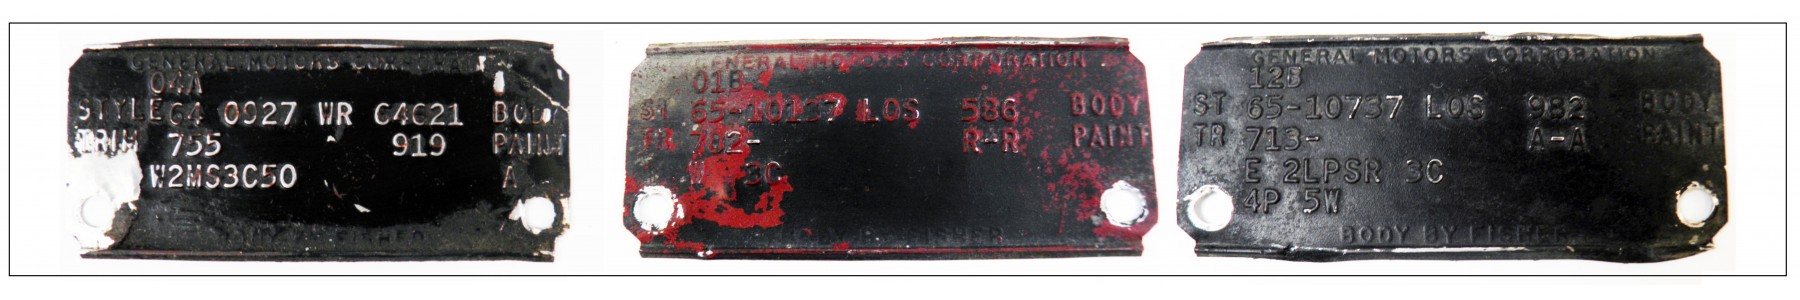 USED 1964 BODY TAGS